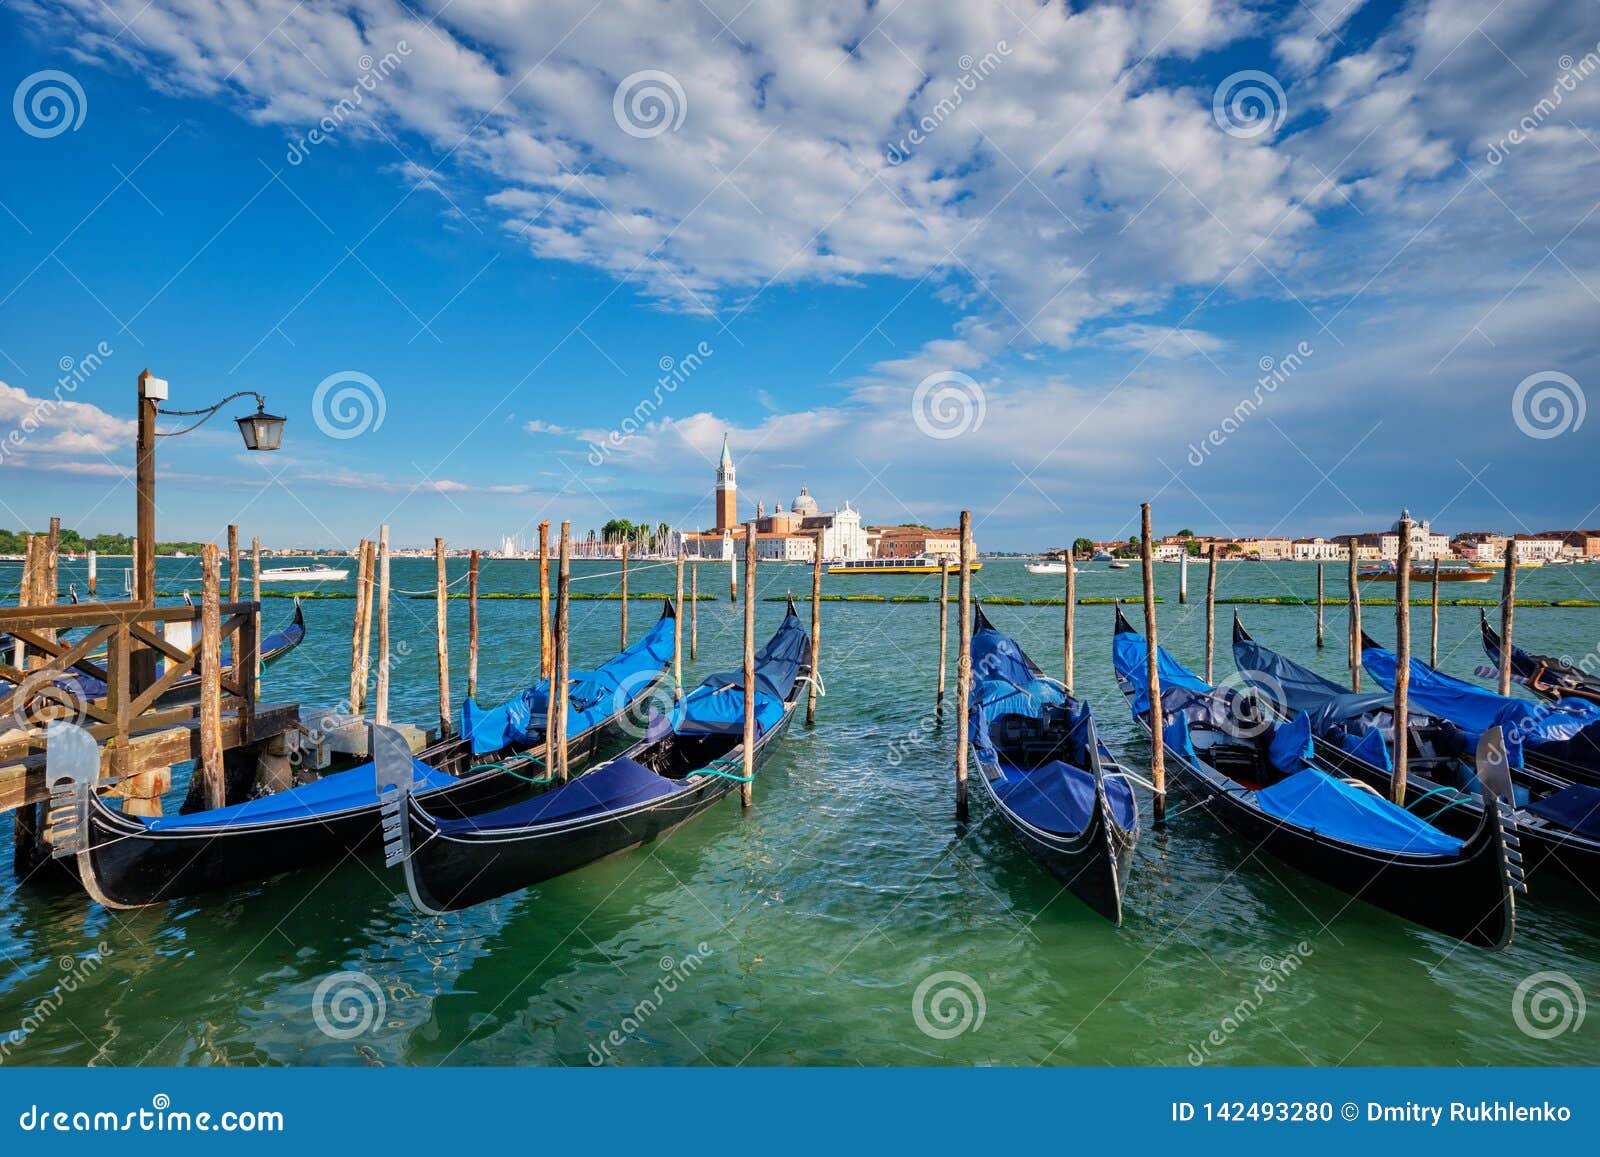 Gondolas And In Lagoon Of Venice By San Marco Square